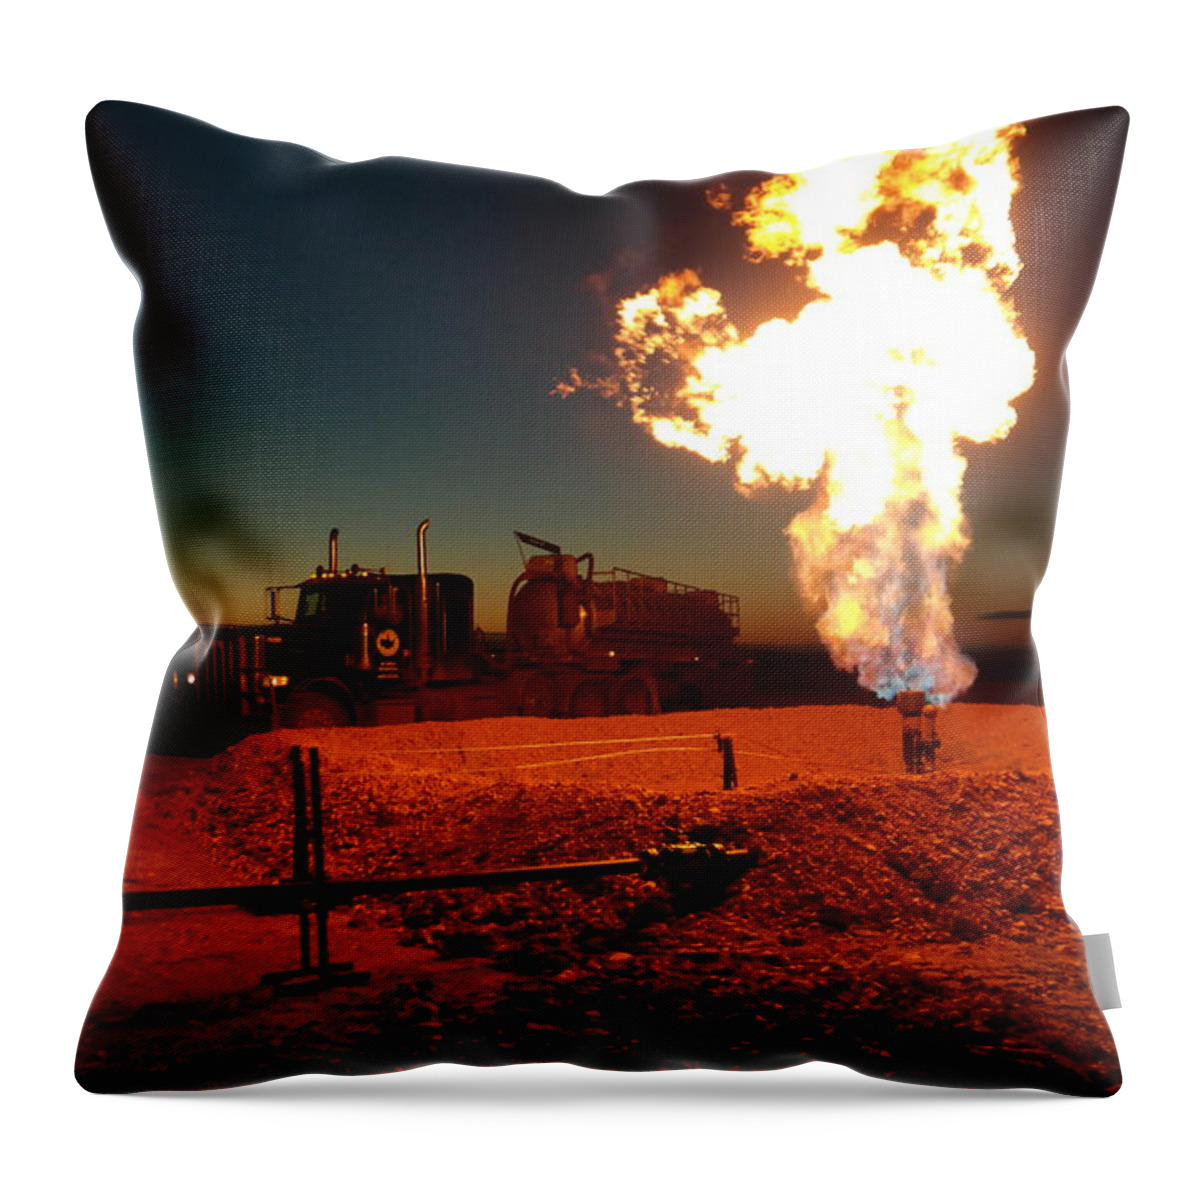 Trucks Throw Pillow featuring the photograph Flare And A Vacuum Truck by Jeff Swan